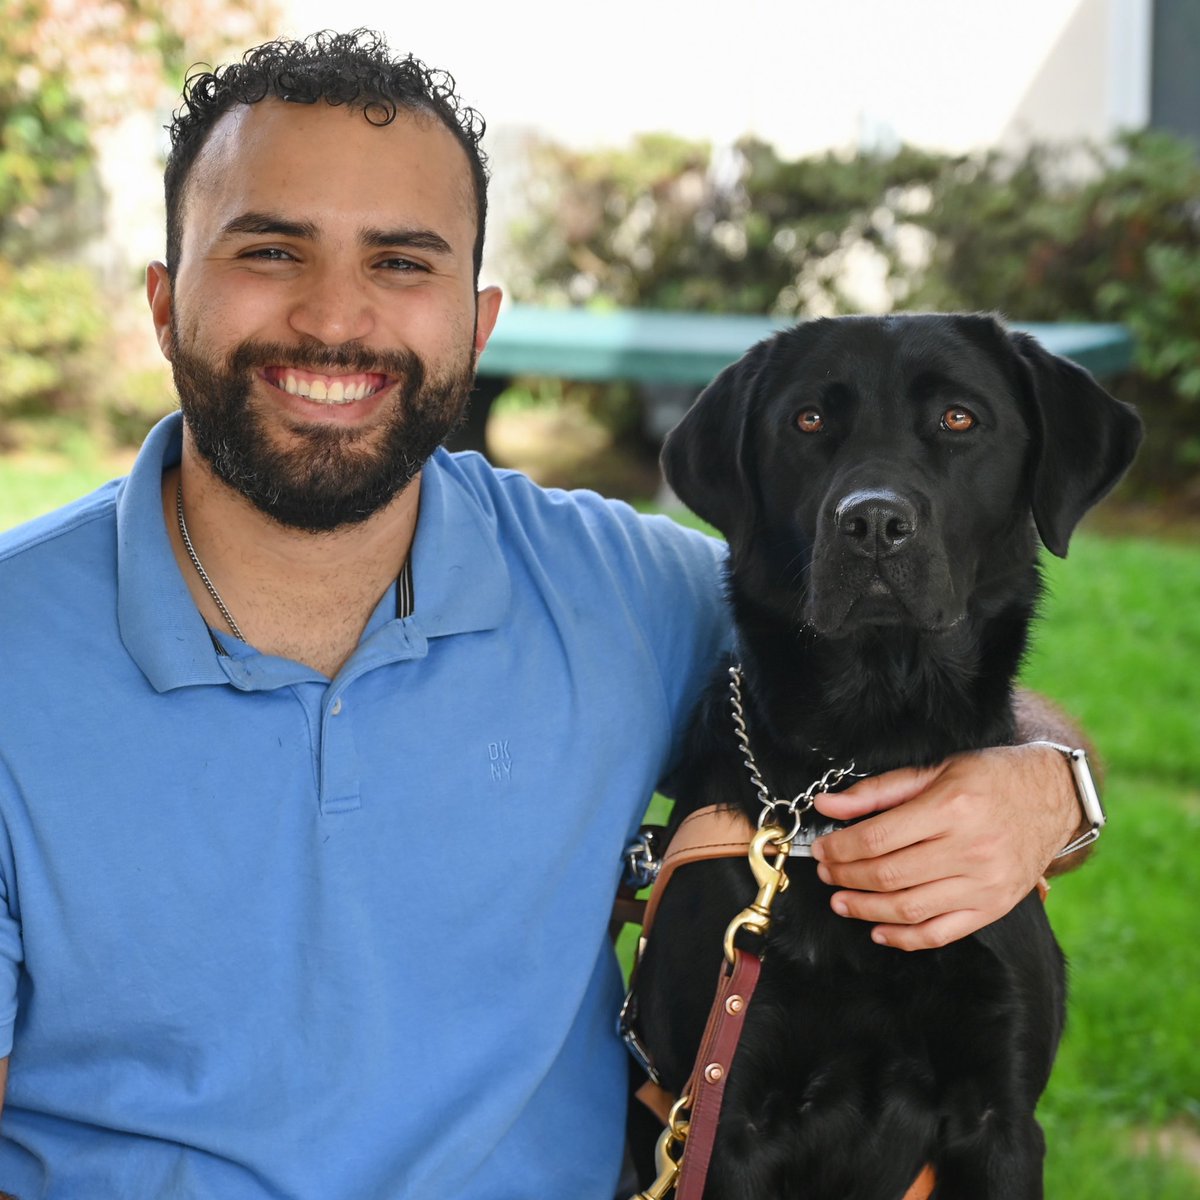 'I did the whole walk... it took me less than ten minutes to do. By myself, that would've taken at least 30 minutes. I felt so empowered.' - Chris, a recent graduate, when asked how it felt to walk at night for the first time with his guide dog, Naomi